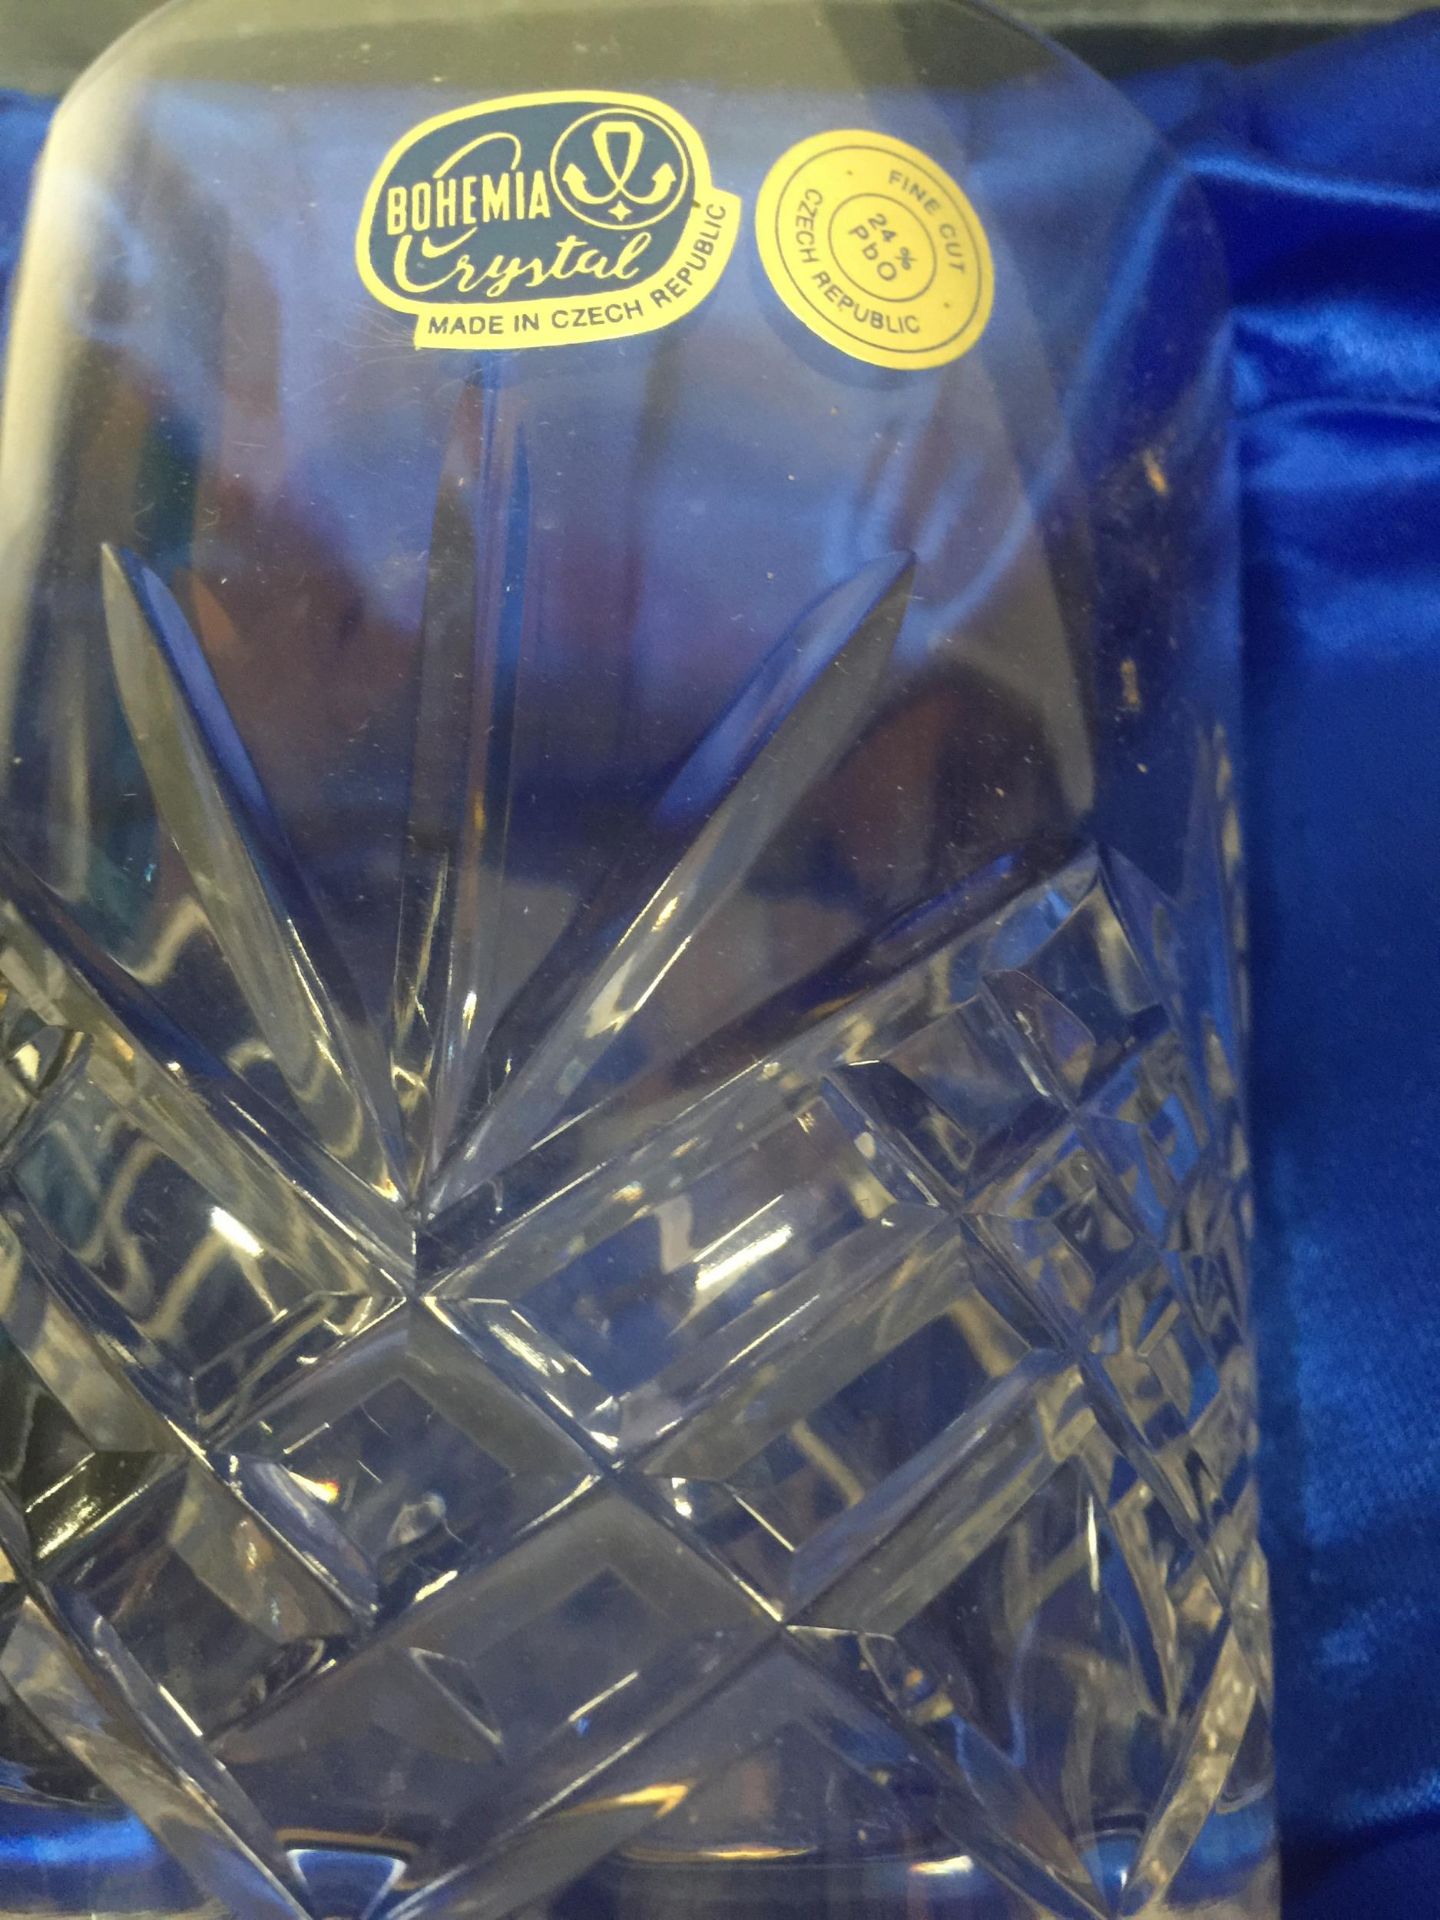 A BOHEMIA CRYSTAL DECANTER WITH FOUR WHISKY TUMBLERS IN A PRESENTATION BOX - Image 3 of 3